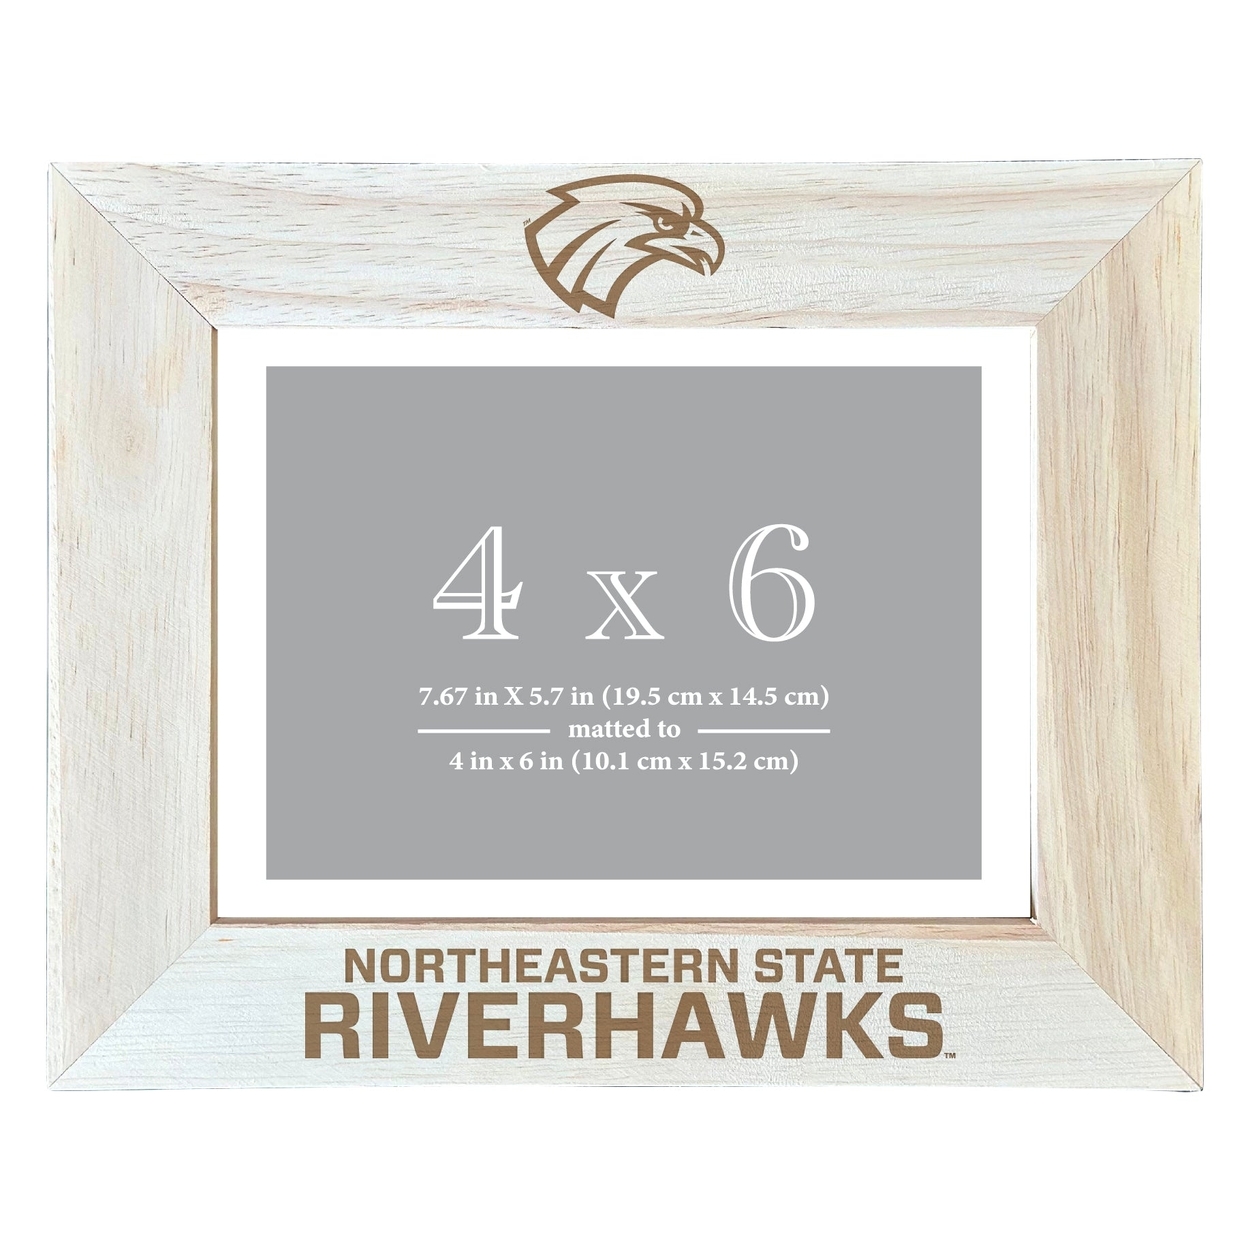 Northeastern State University Riverhawks Wooden Photo Frame Matted To 4 X 6 Inch - Etched